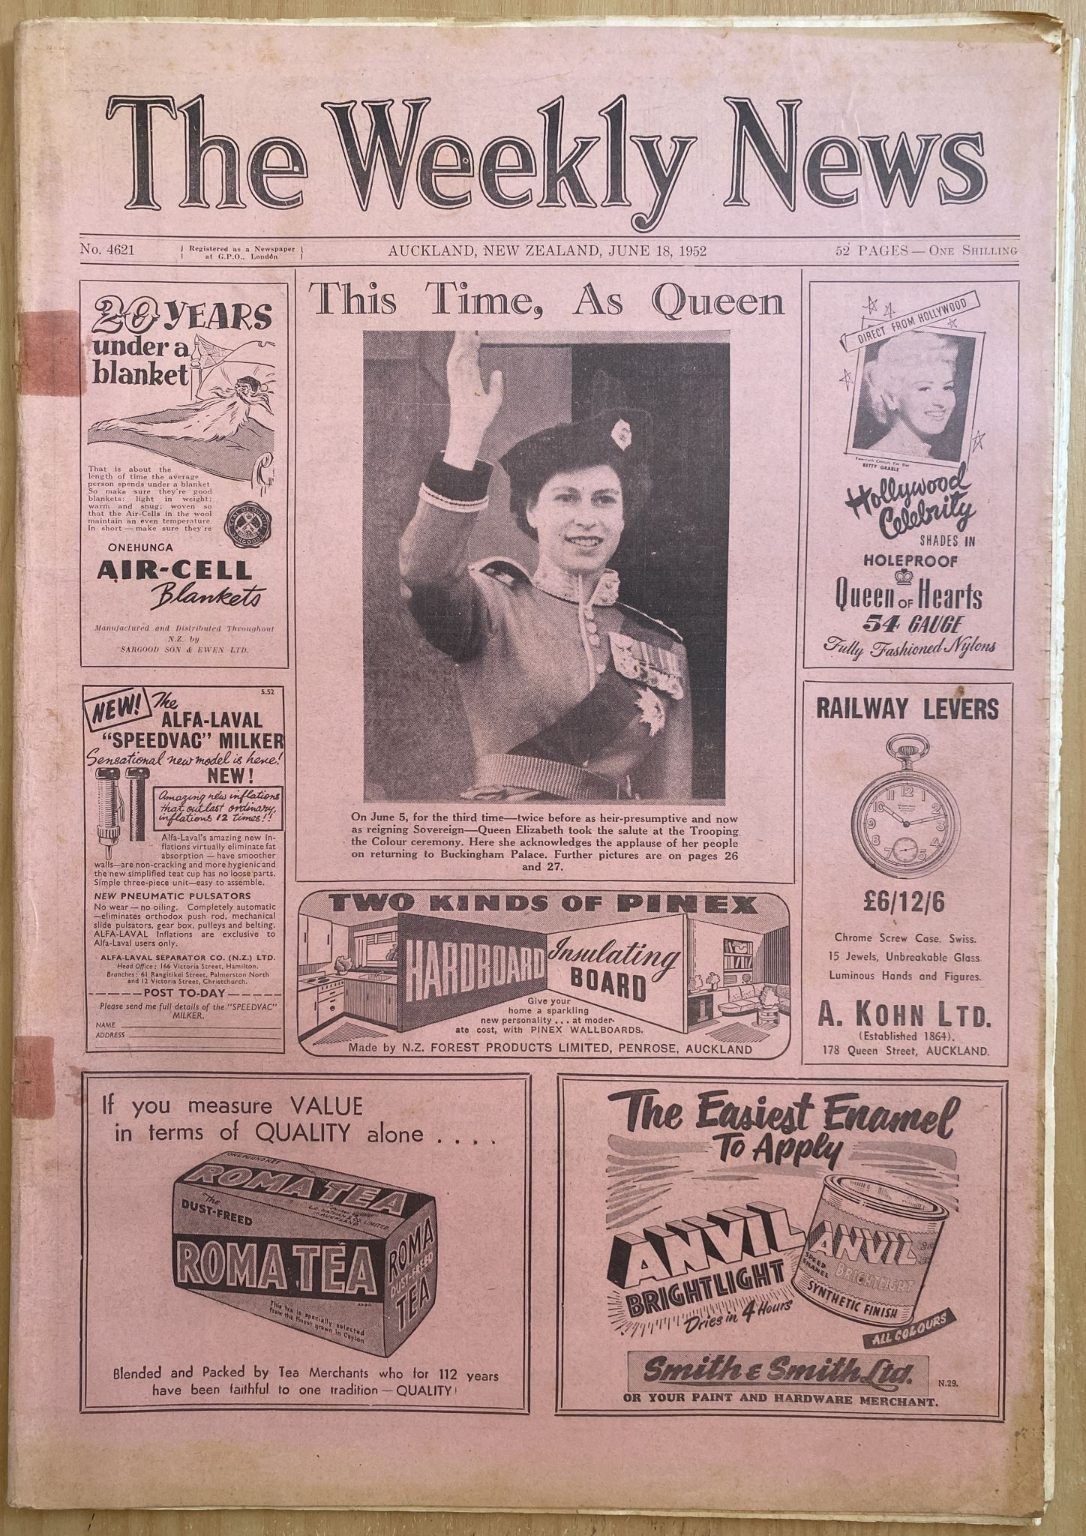 OLD NEWSPAPER: The Weekly News - No. 4621, 18 June 1952